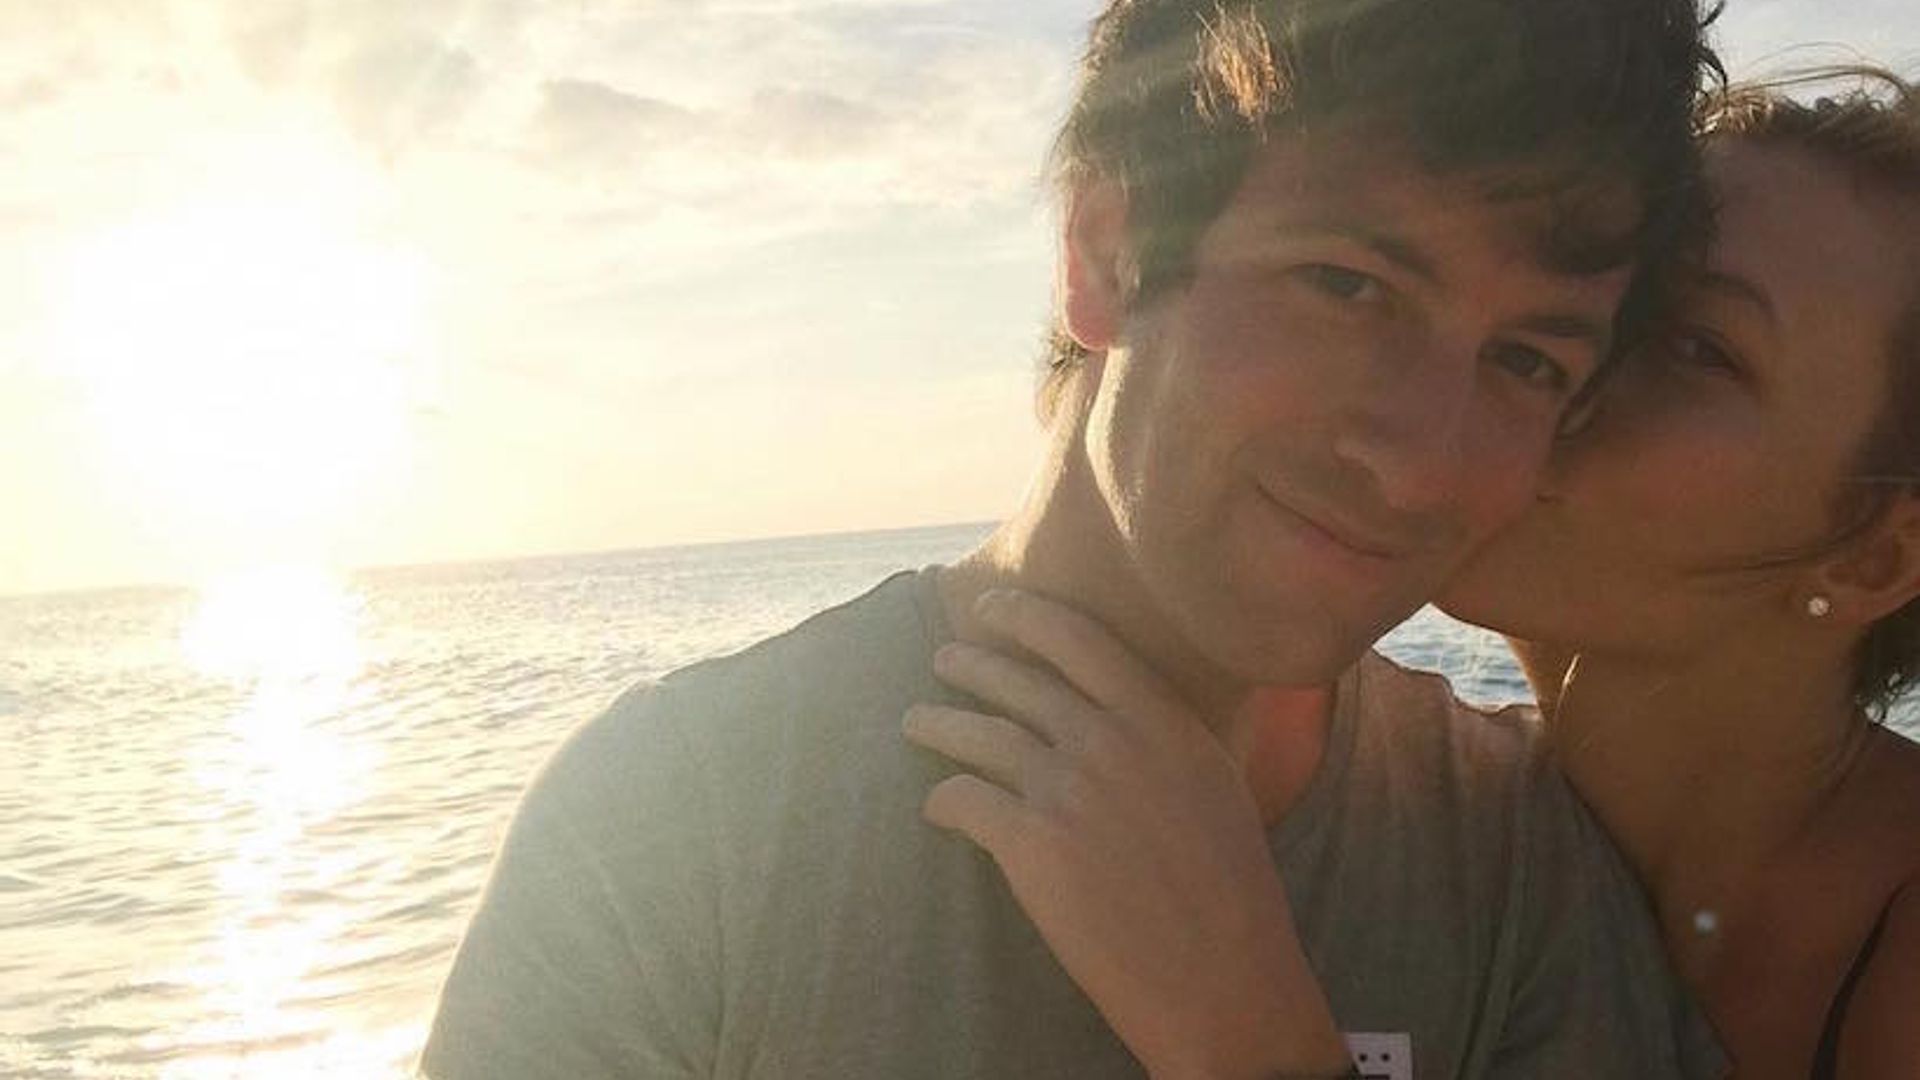 Karlie Kloss announces her engagement to Joshua Kushner – see the incredible ring!